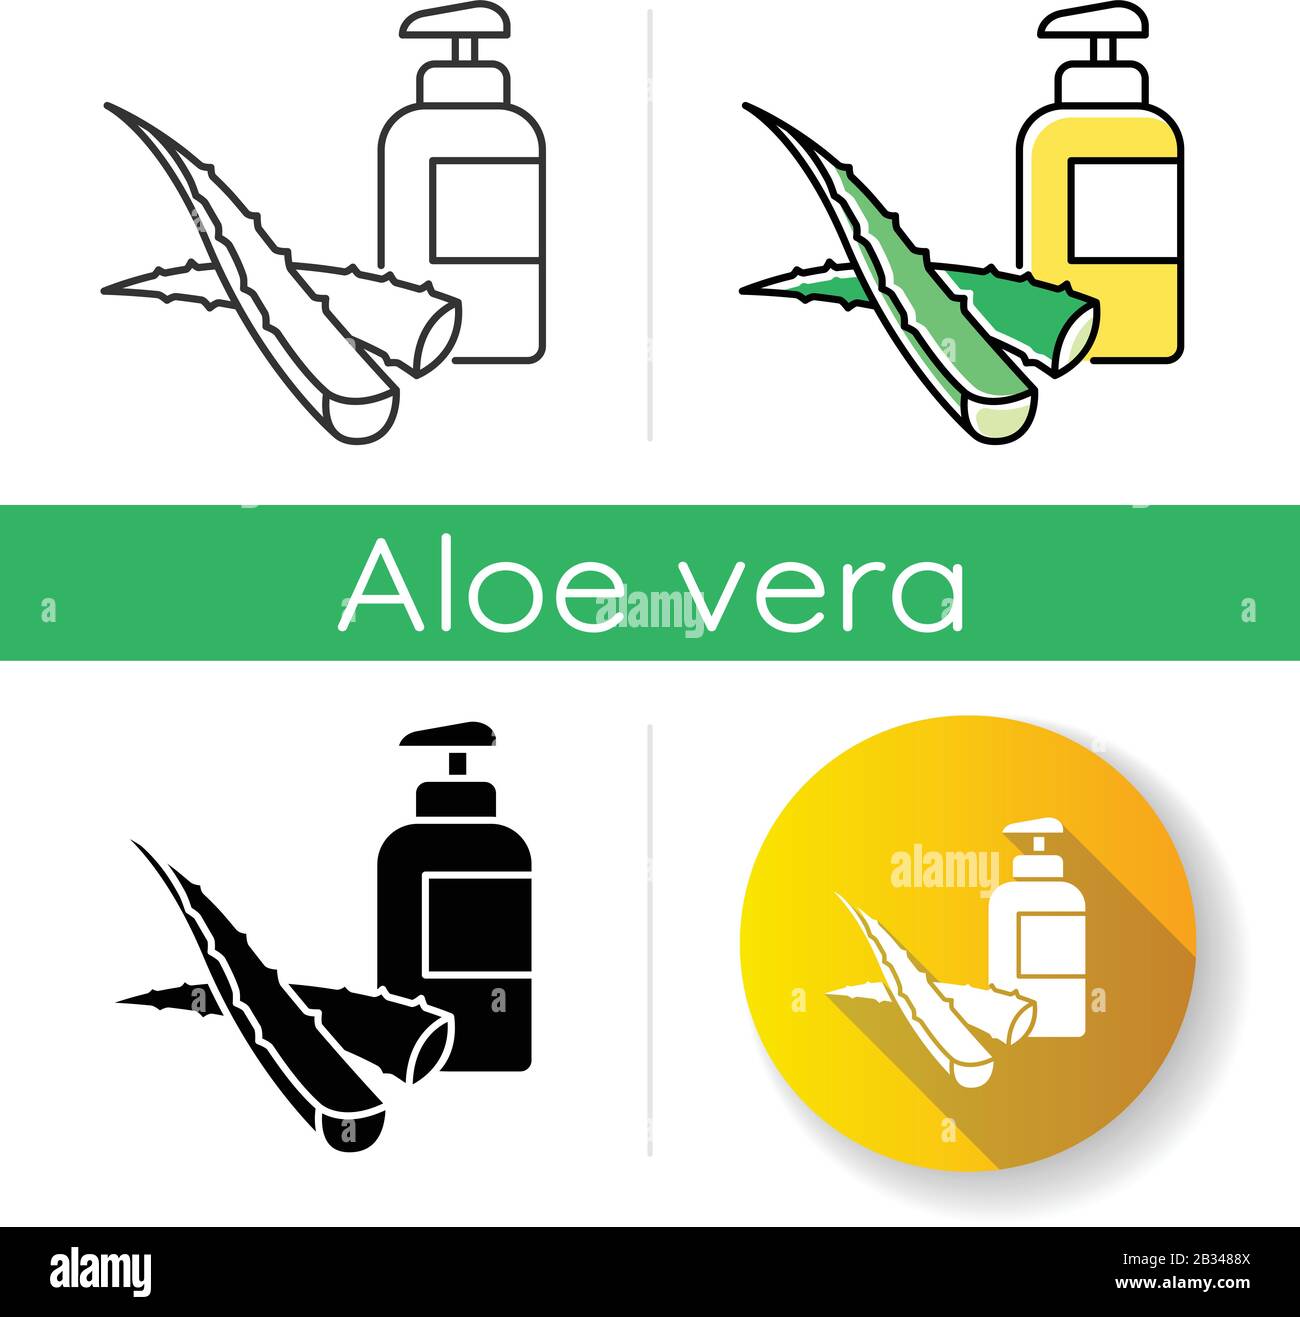 Herbal lotion icon. Plant based gel and natural liquid soap. Organic bathing product. Dermatology. Moisturizer with aloe vera extract. Linear black Stock Vector